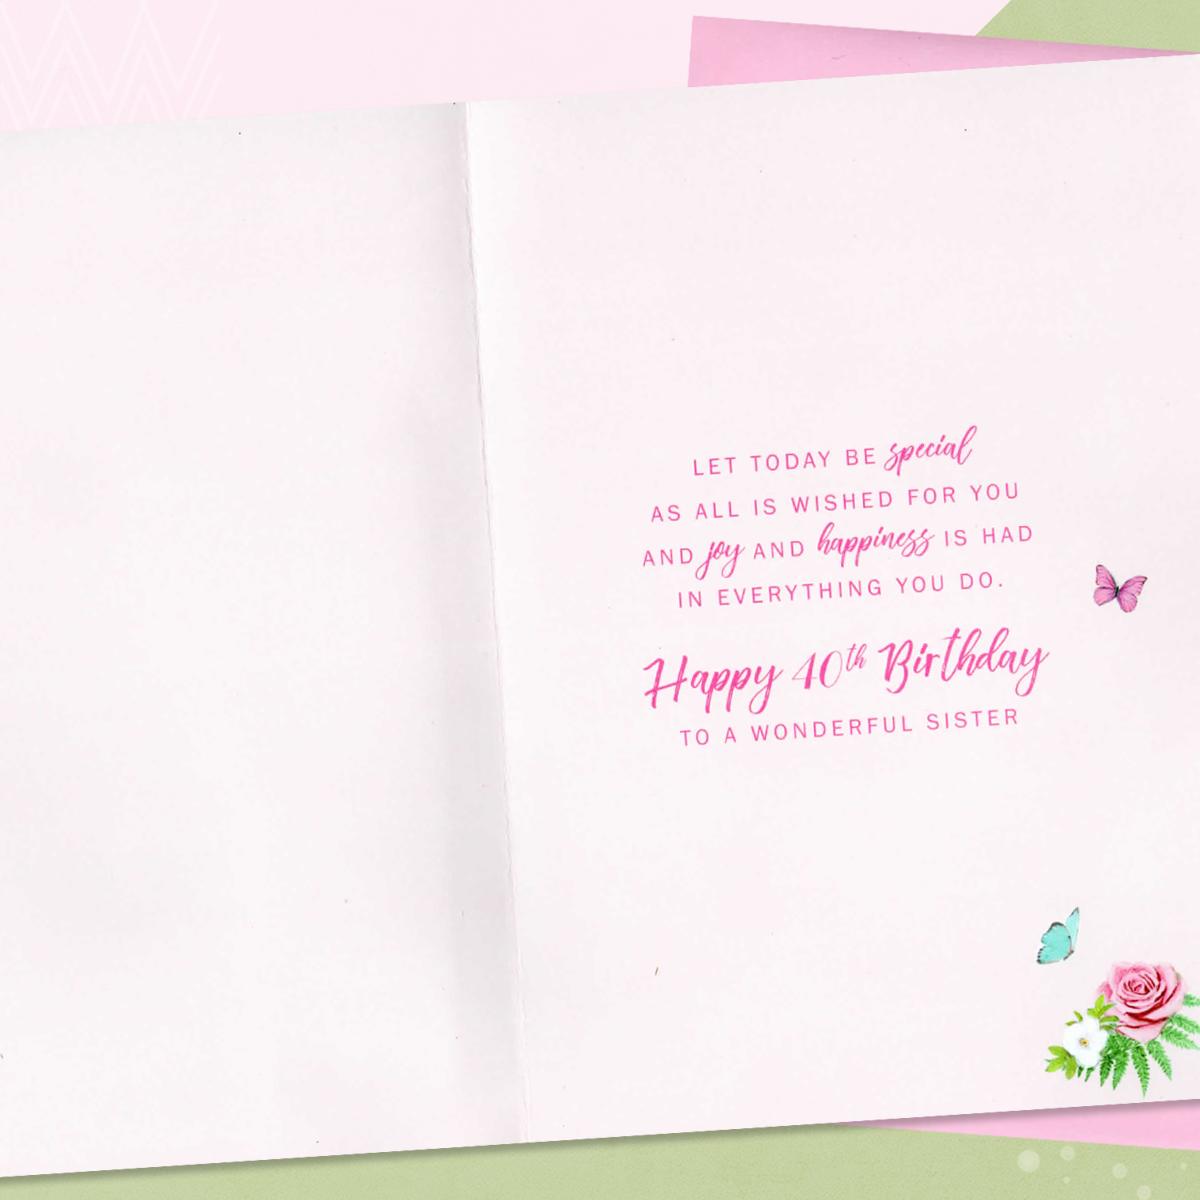 Inside Image Of Age 40 Sister Card To Show Layout And Printed Text